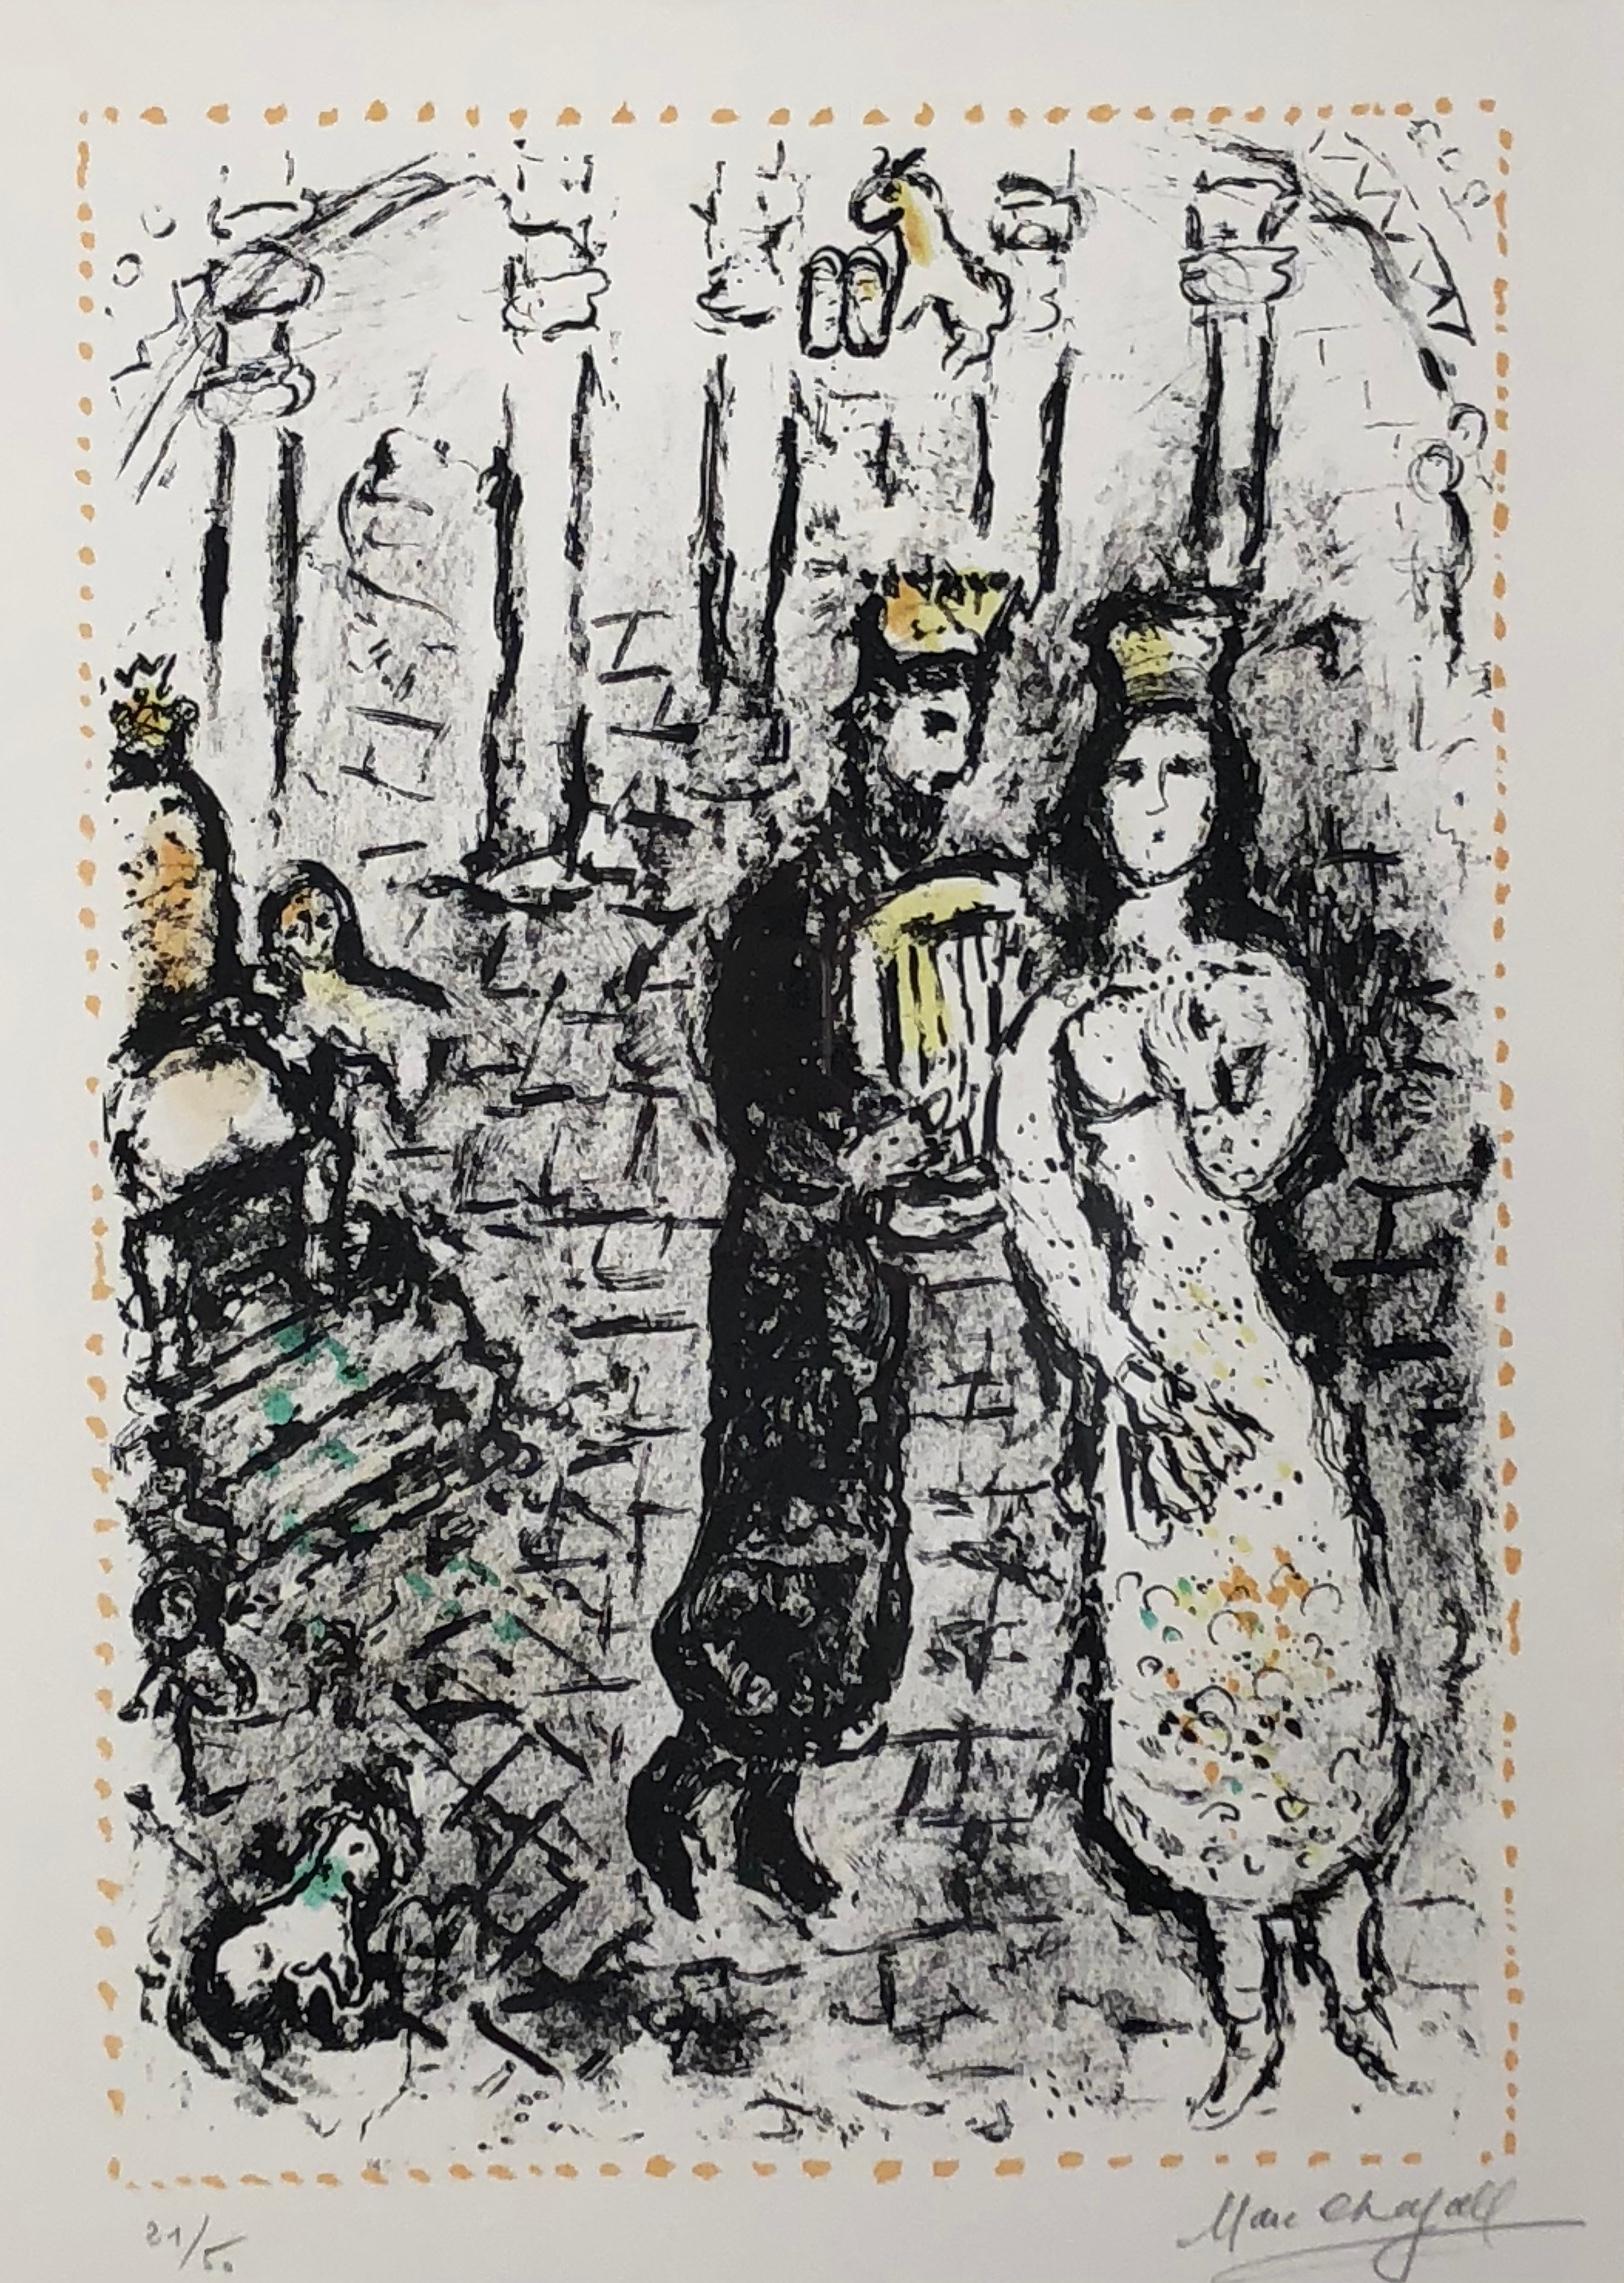 This piece is an original color lithograph done by Marc Chagall in 1982. This piece depicts King David trying to validate his claim to the throne in order to rule over the Israelite tribes. It is hand signed and numbered from the edition of 50 on